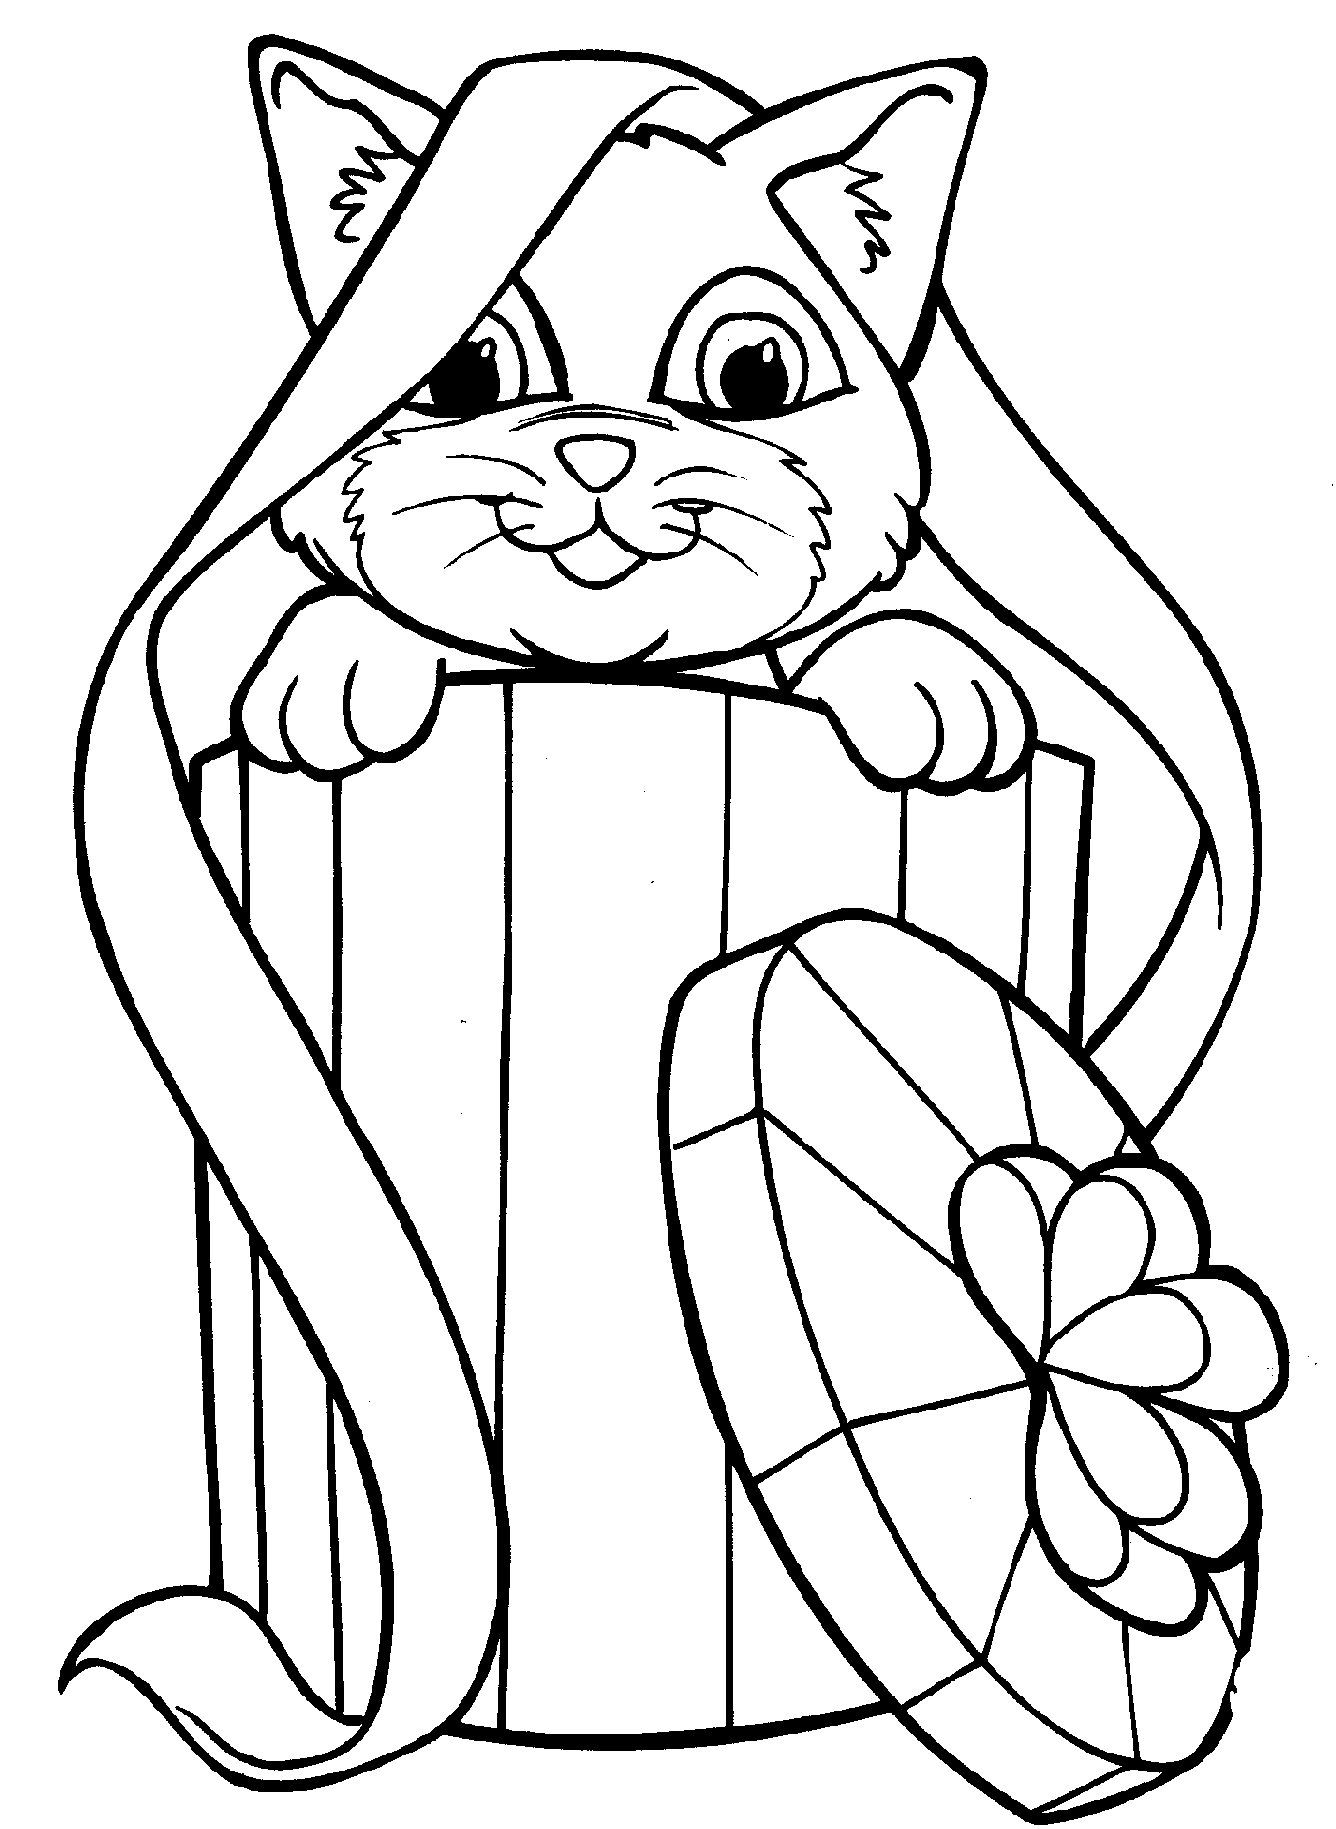  Cat Coloring Pages For Kids for Kids